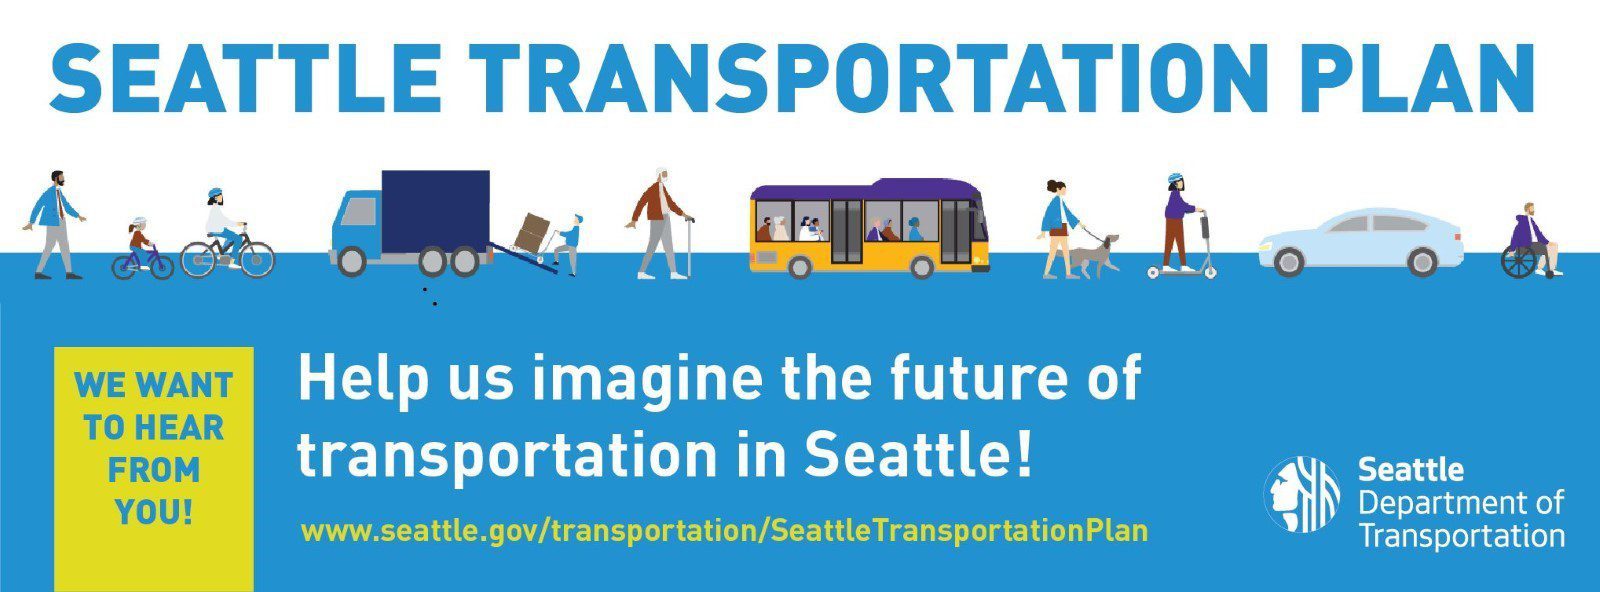 Logo for the Seattle Transportation Plan, encouraging people to help us imagine the future of transportation in Seattle.